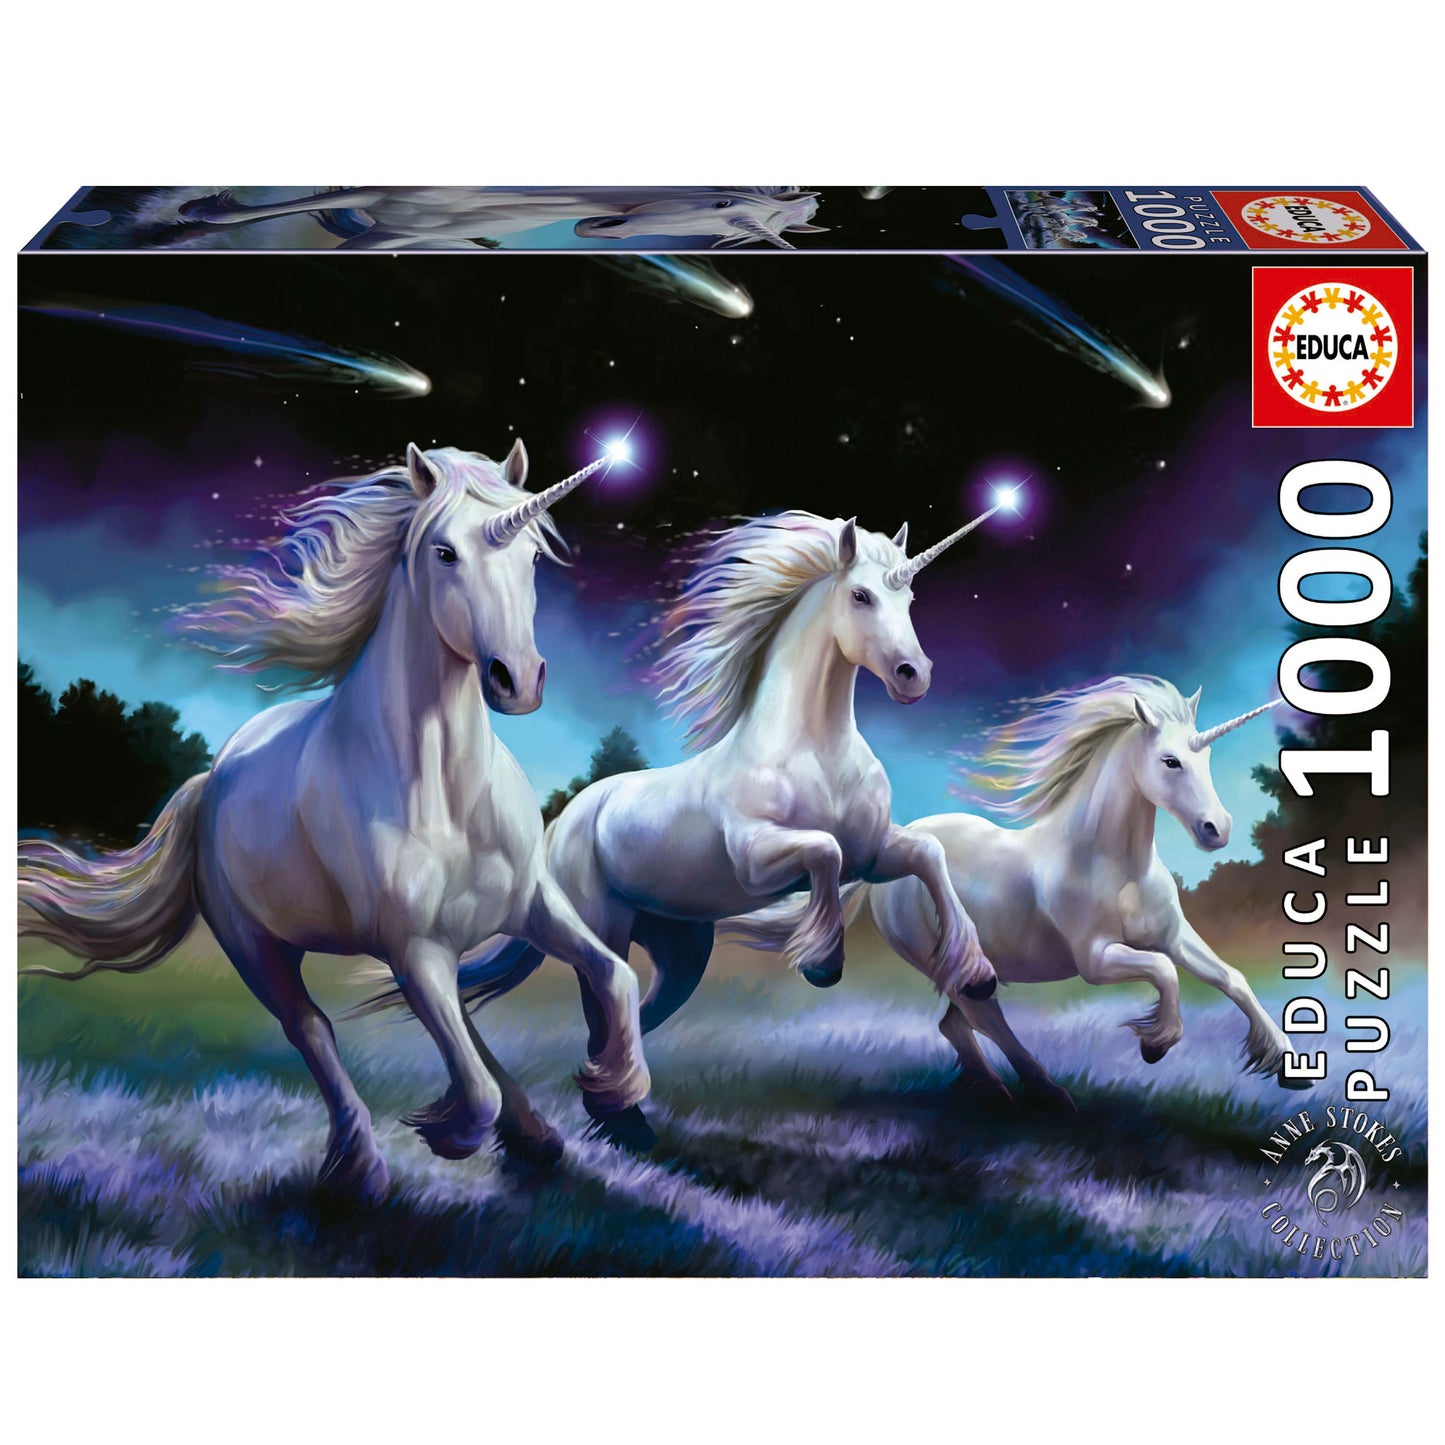 Shooting Stars by Anne Stokes, 1000 Piece Puzzle